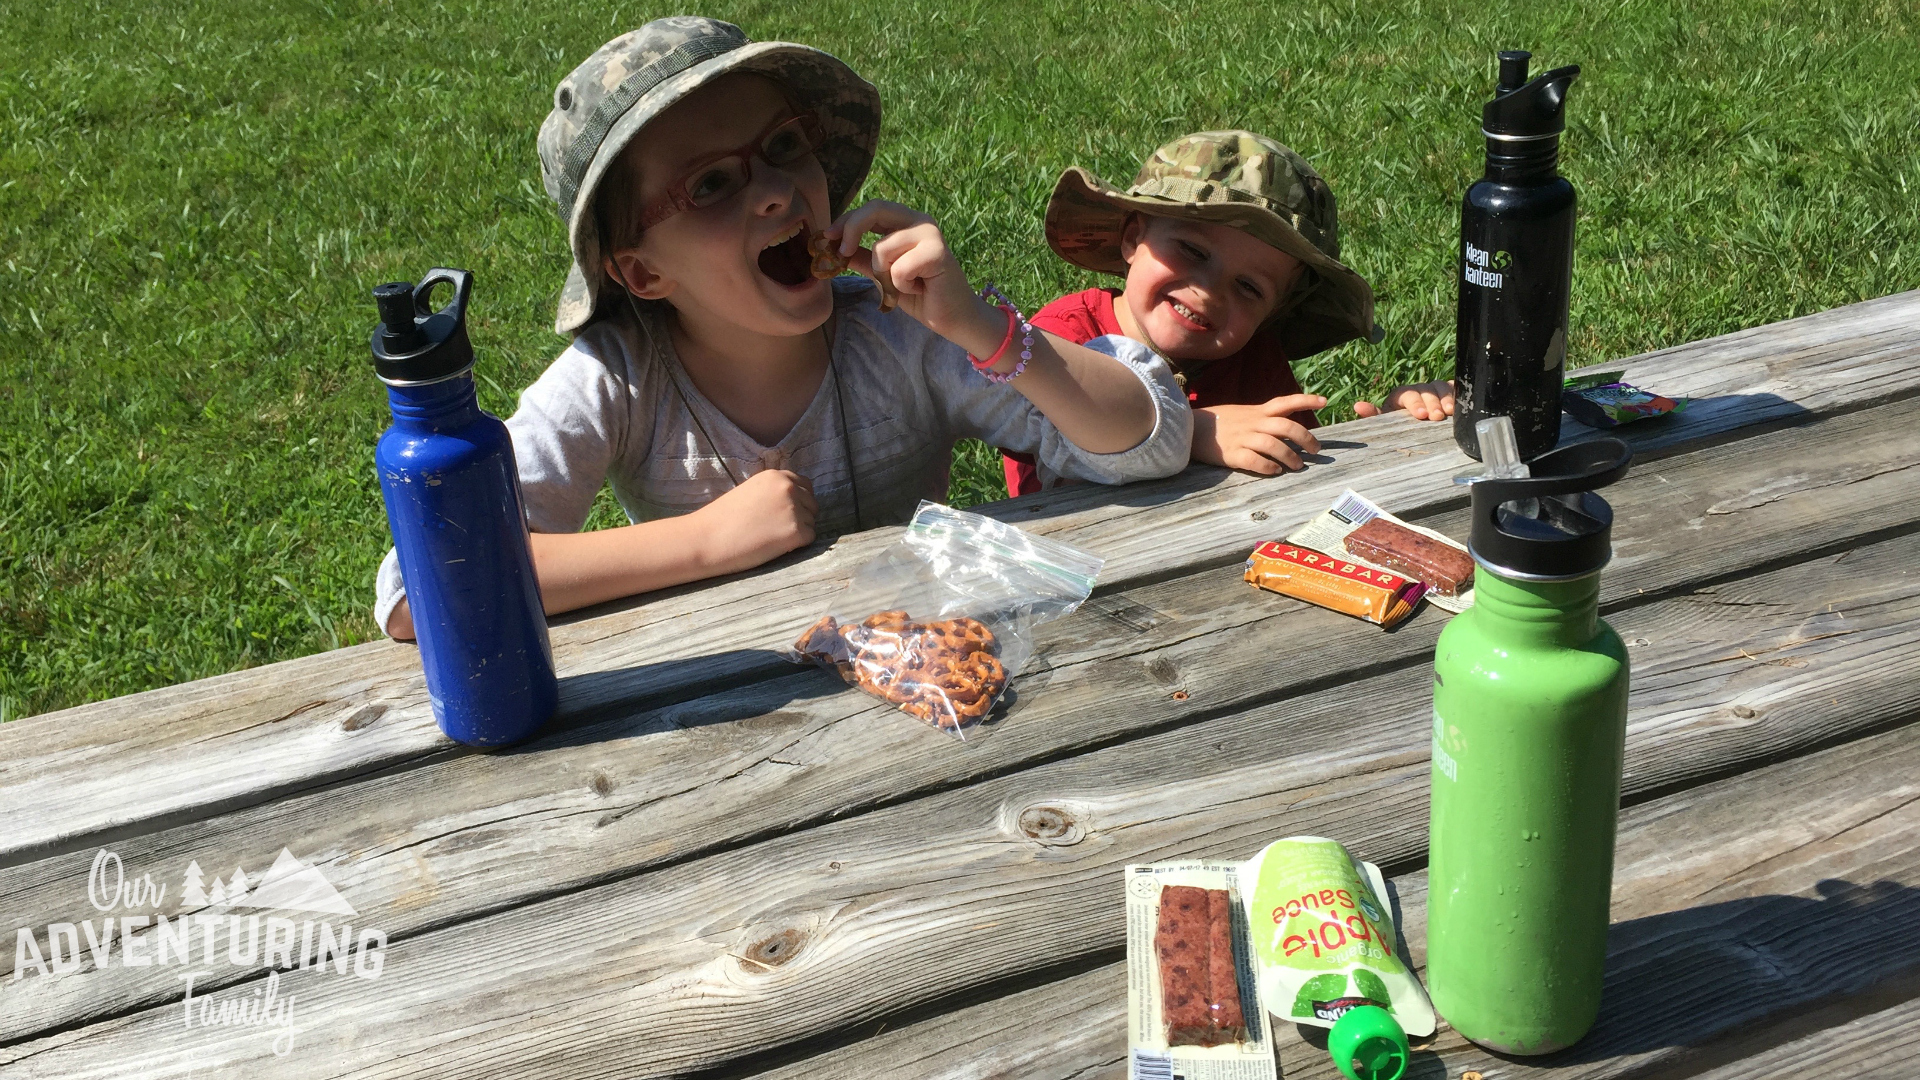 Celiac disease means mealtimes can be stressful, but here's 5 tips for planning meals & snacks that fit your dietary needs when adventuring with children. Find those tips at ouradventuringfamily.com. 